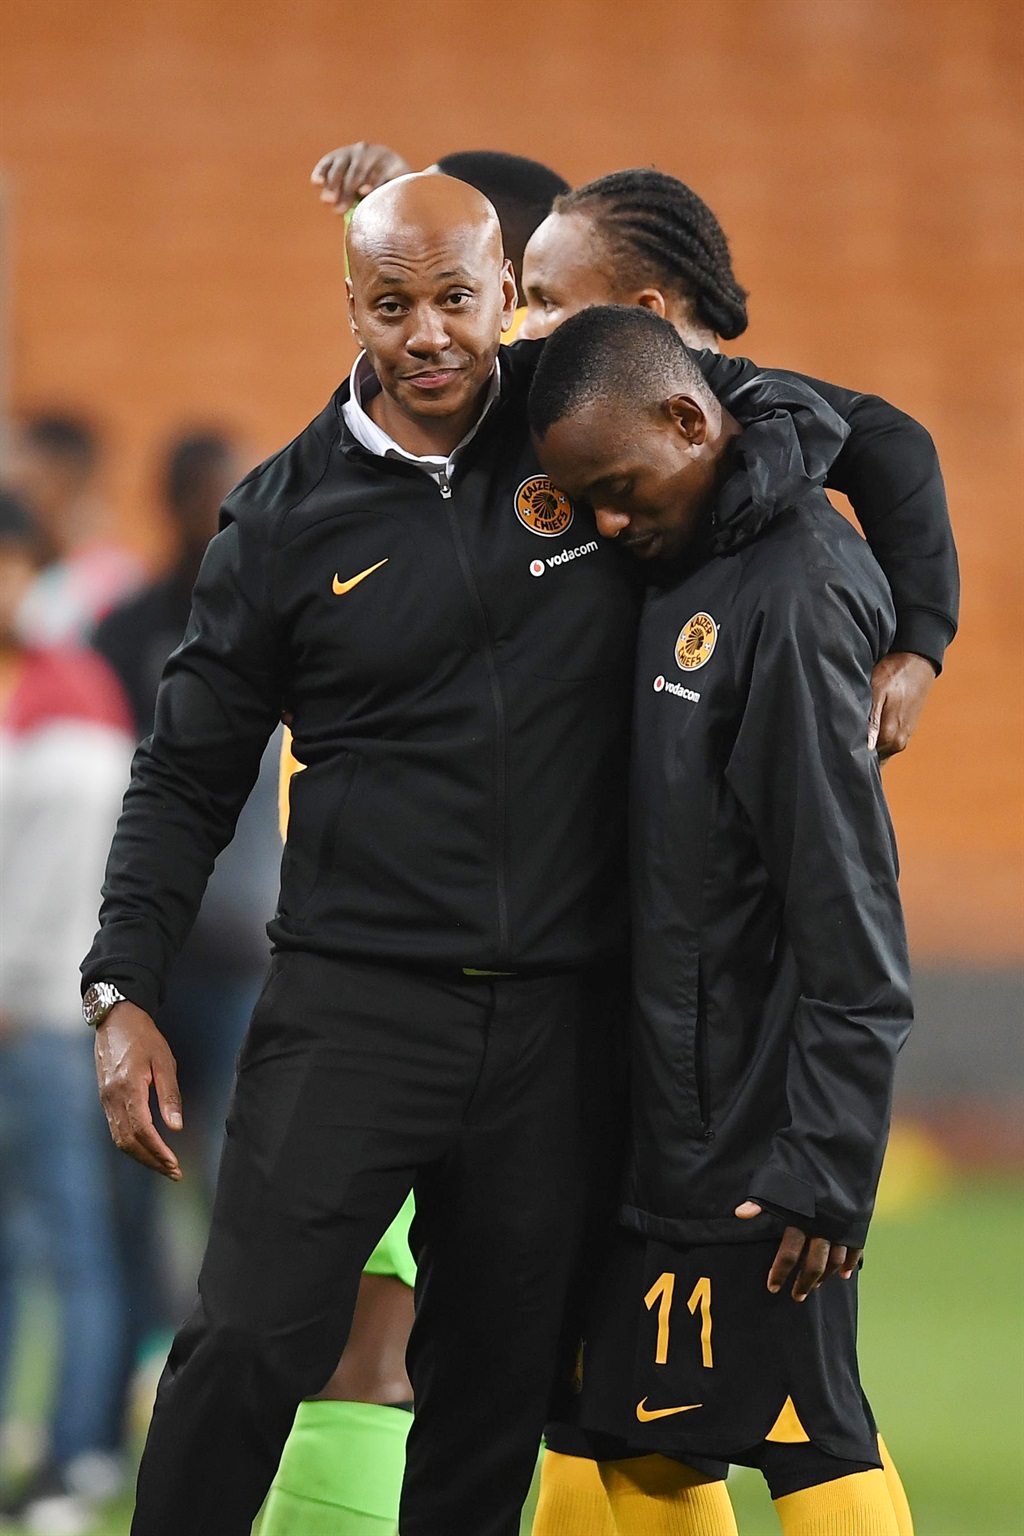 JOHANNESBURG, SOUTH AFRICA - OCTOBER 19: Kaizer Motaung jnr  and Khama Billiat of Kazier Chiefs during the DStv Premiership match between Kazier Chiefs and TS Galaxy at FNB Stadium on October 19, 2022 in Johannesburg, South Africa. (Photo by Lefty Shivambu/Gallo Images)